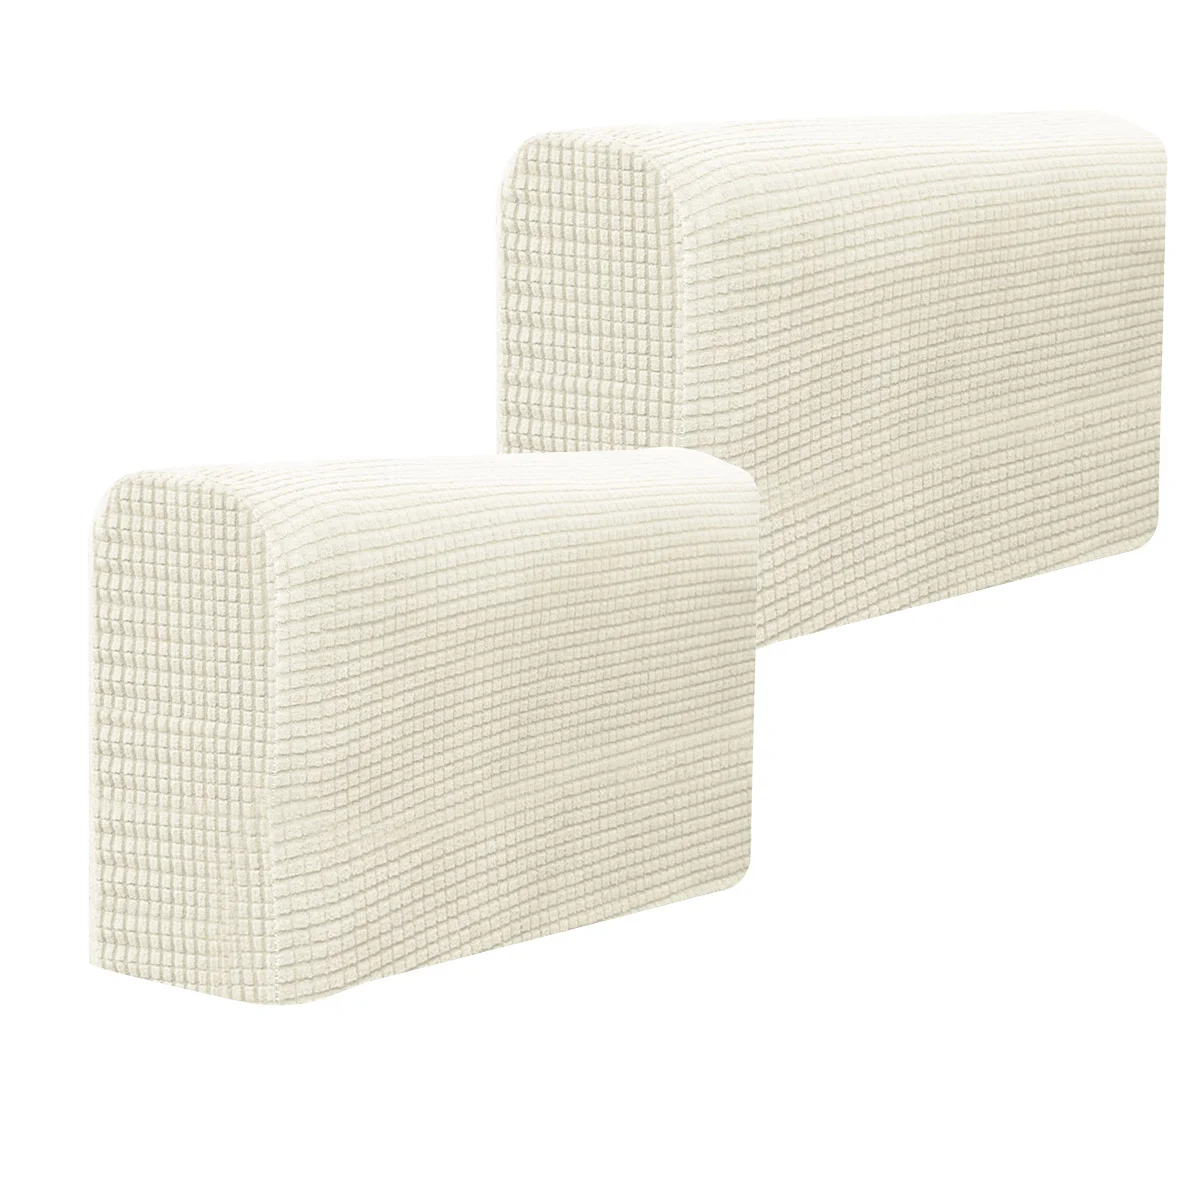 

Arm Covers Armrest Sofa Cover Chair Armchair Couch Protector Towel Protectors Stretch Rest Chairs Slipcover Slipcovers Anti